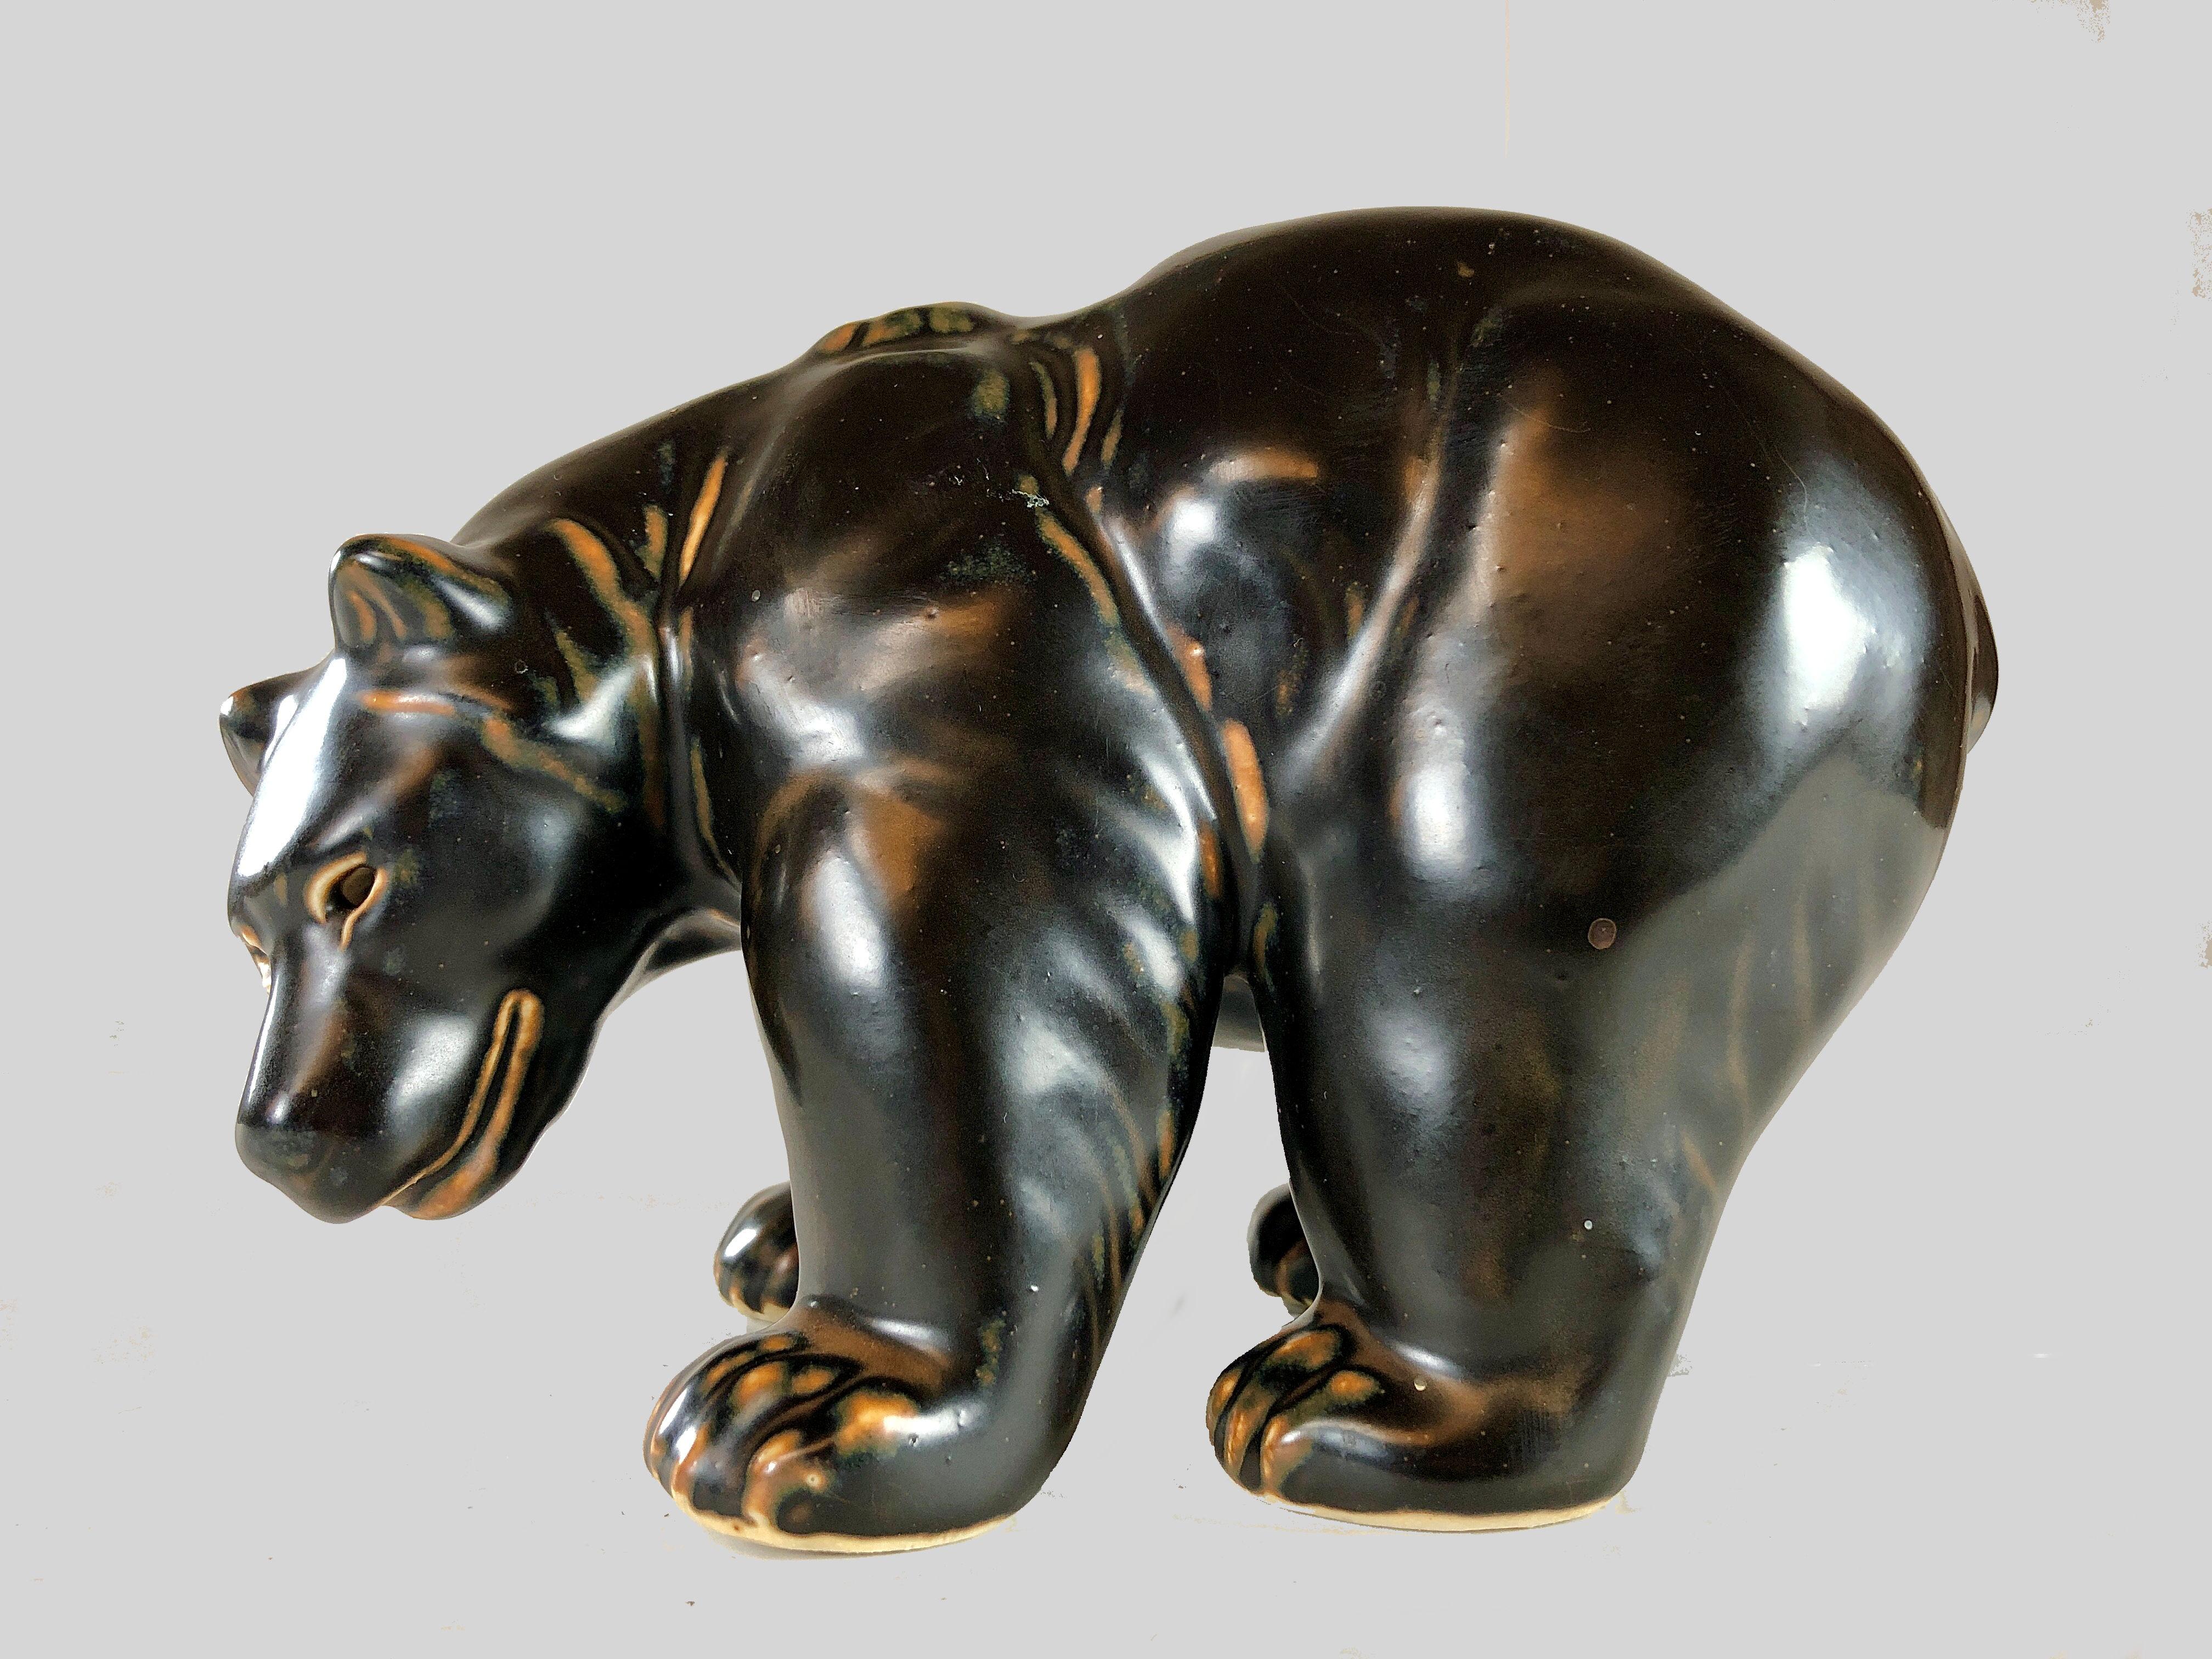 Danish Knud Kyhn bear figurine for Royal Copenhagen

The lively bear was created by Knud Kyhn (1880-1969) in 1957. Knud Kyhn worked for for Royal Copenhagen from 1903-1910, 1924-1932 and 1936-1967. During this period he created many figures of